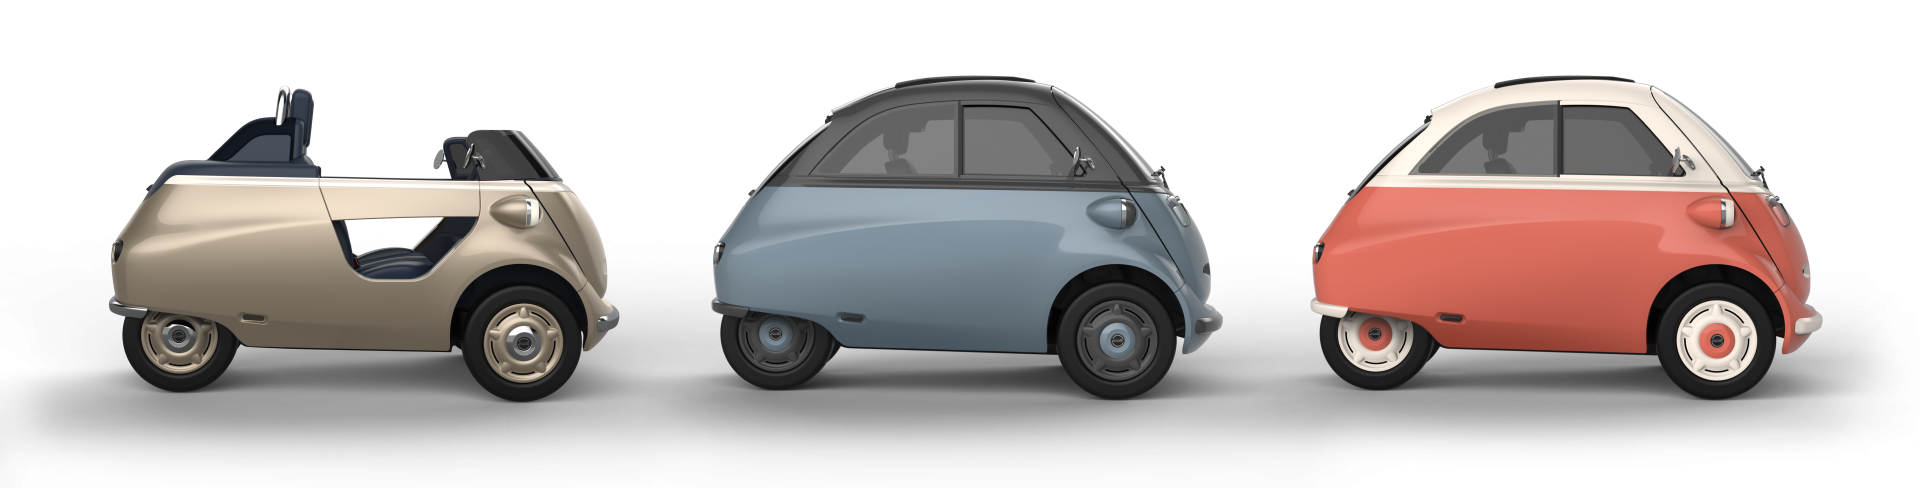 Caption: The Evetta, the model that ElectricBrands wants VDL Nedcar to take into production first, has several variants.